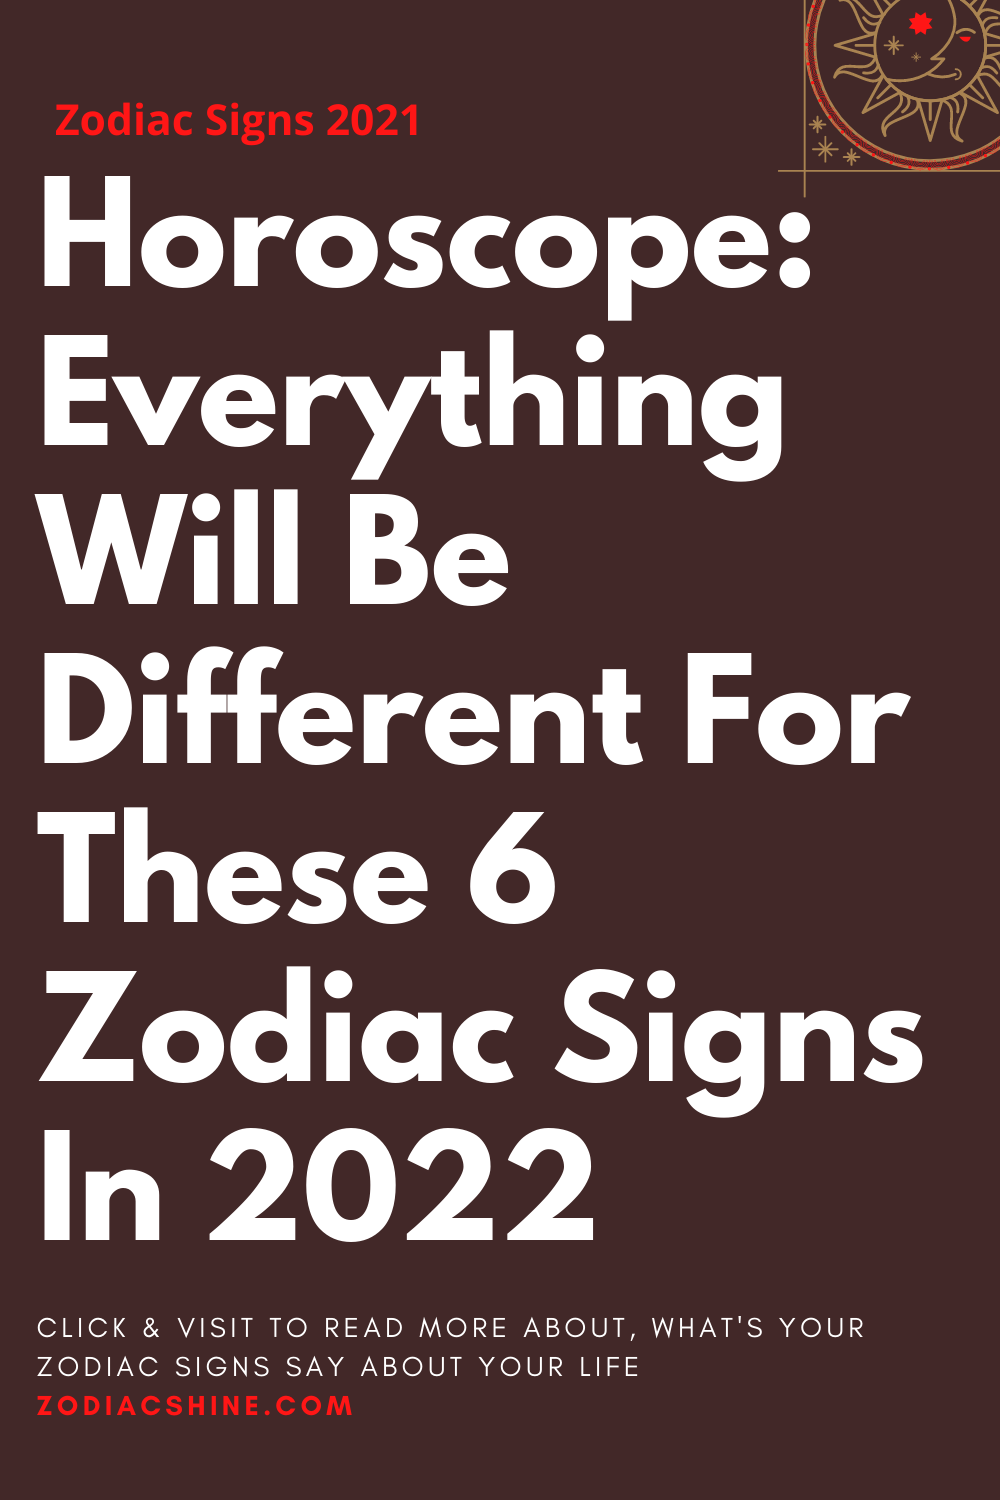 Horoscope: Everything Will Be Different For These 6 Zodiac Signs In 2022